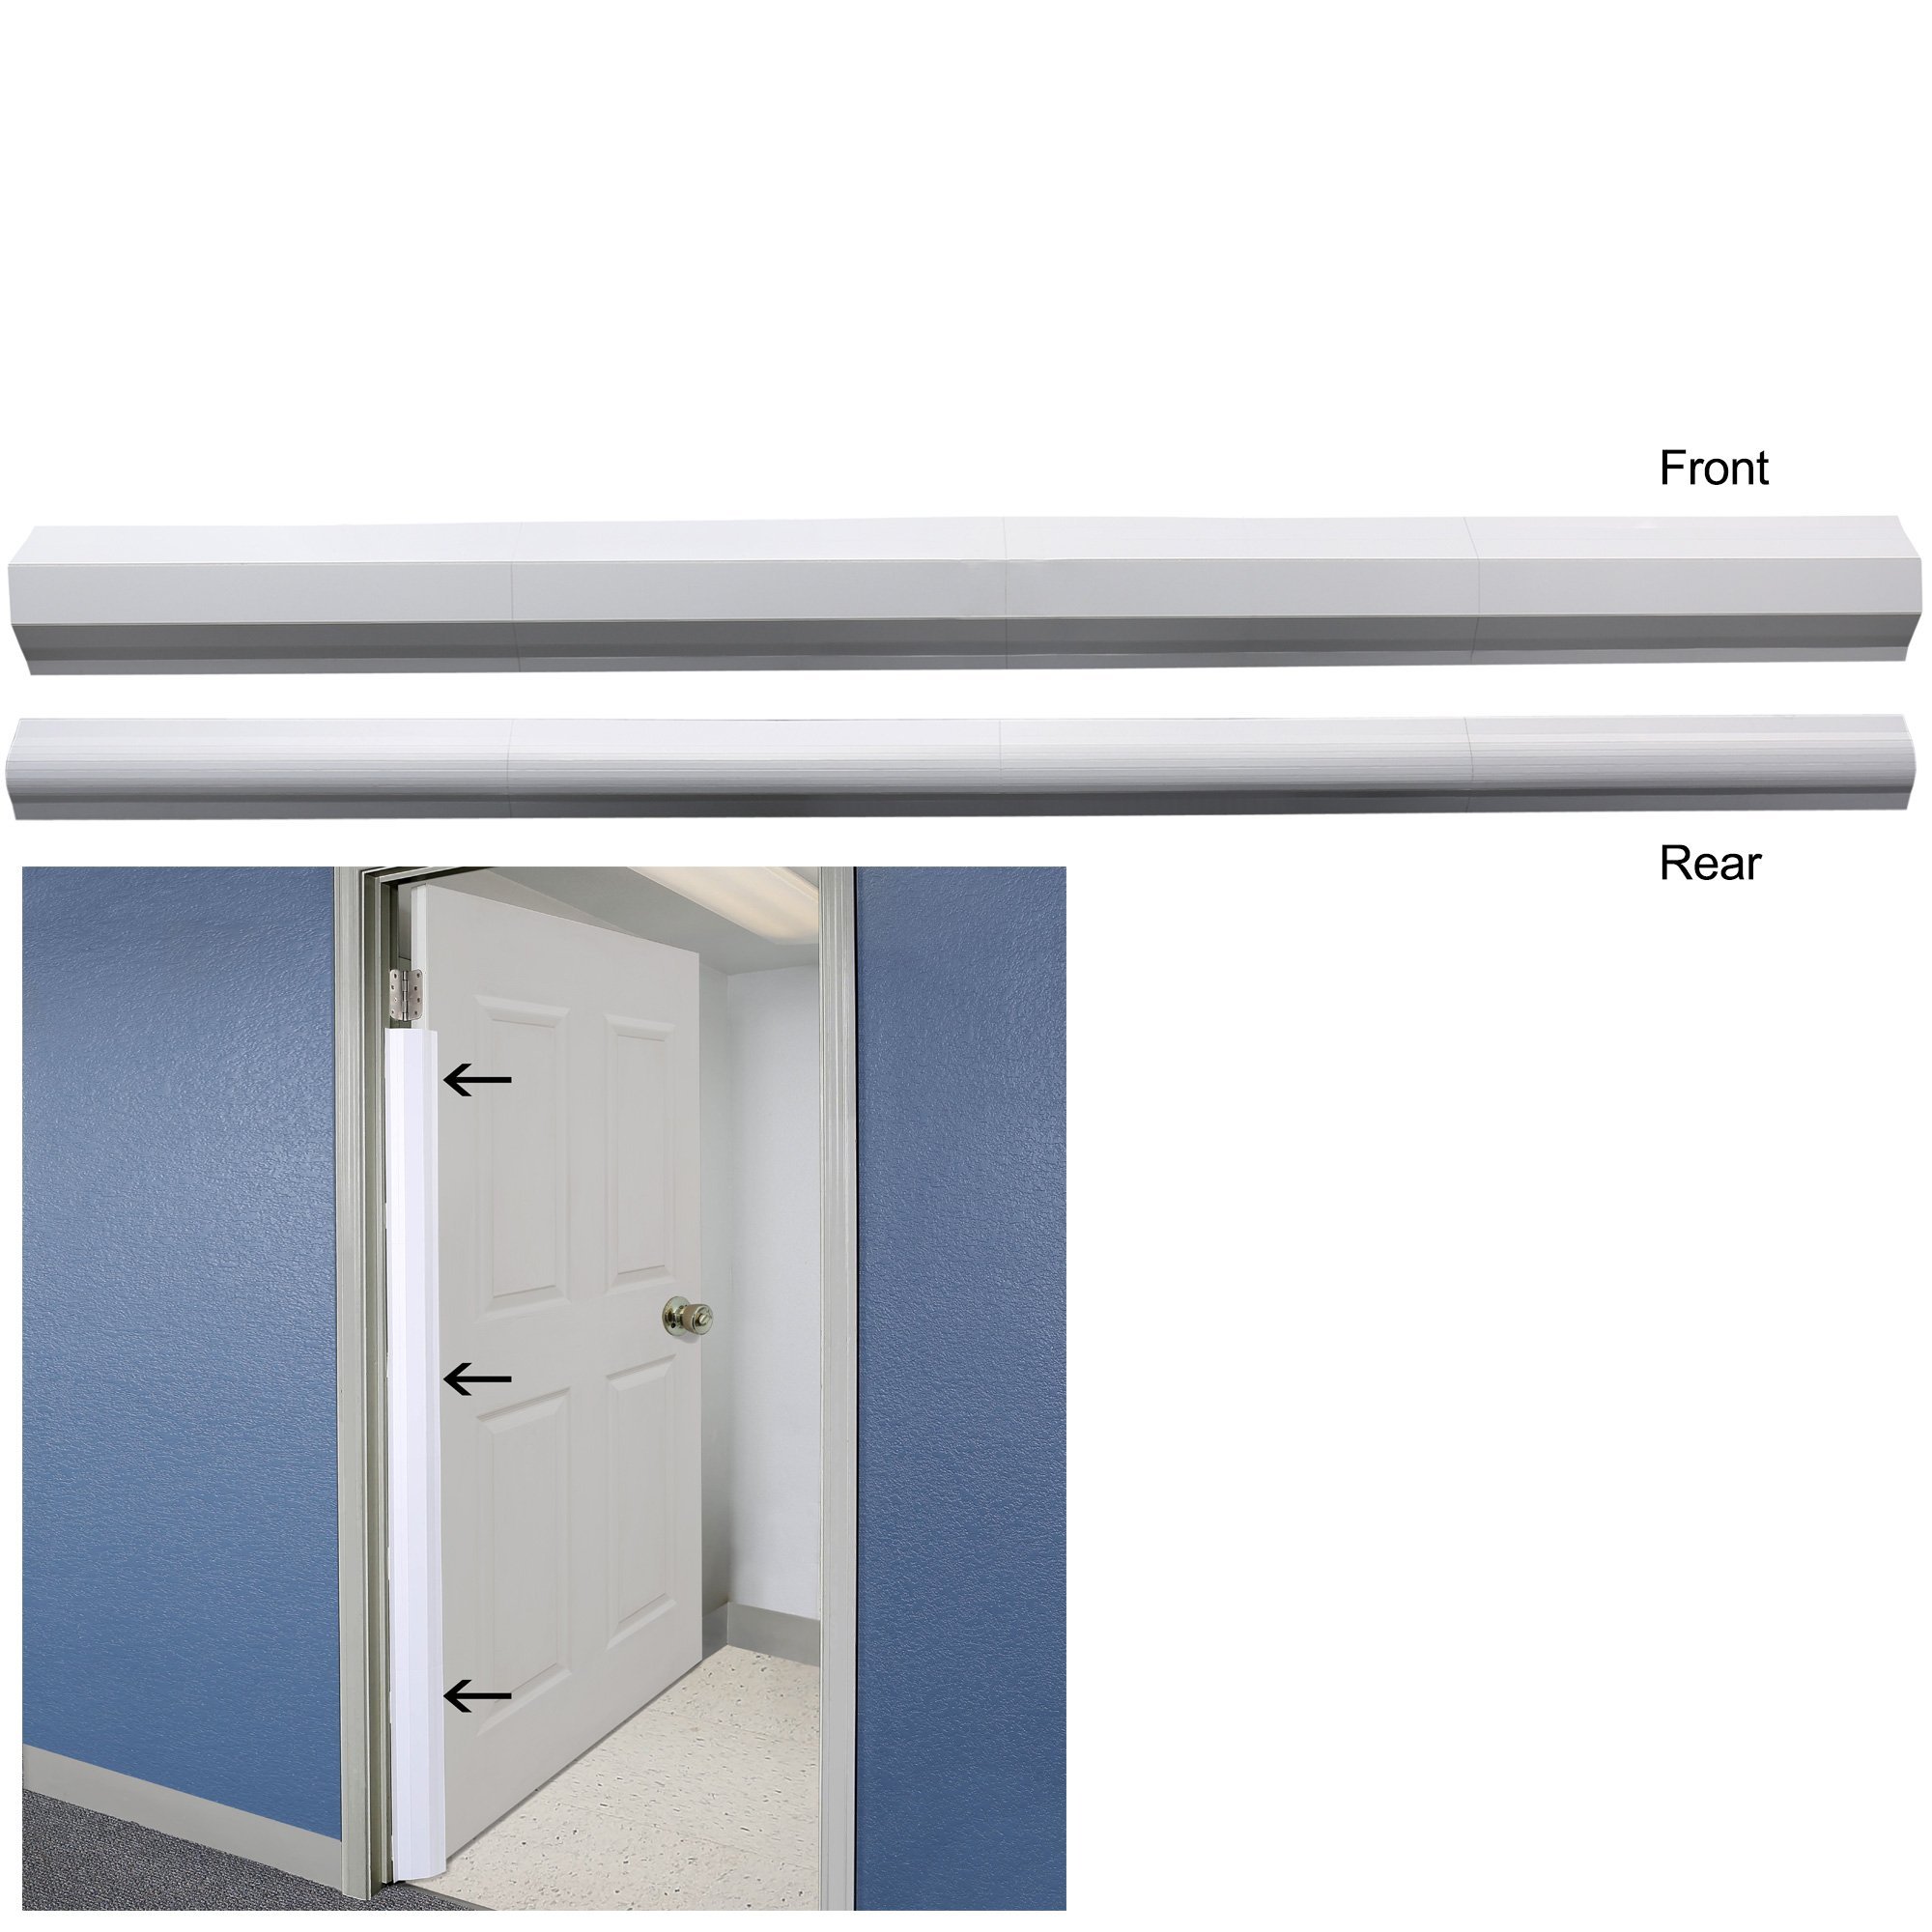 PinchNot Home Shield for 90 Degree Doors (Set) - Guard for Door Finger Child Safety. by Carlsbad Safety Products